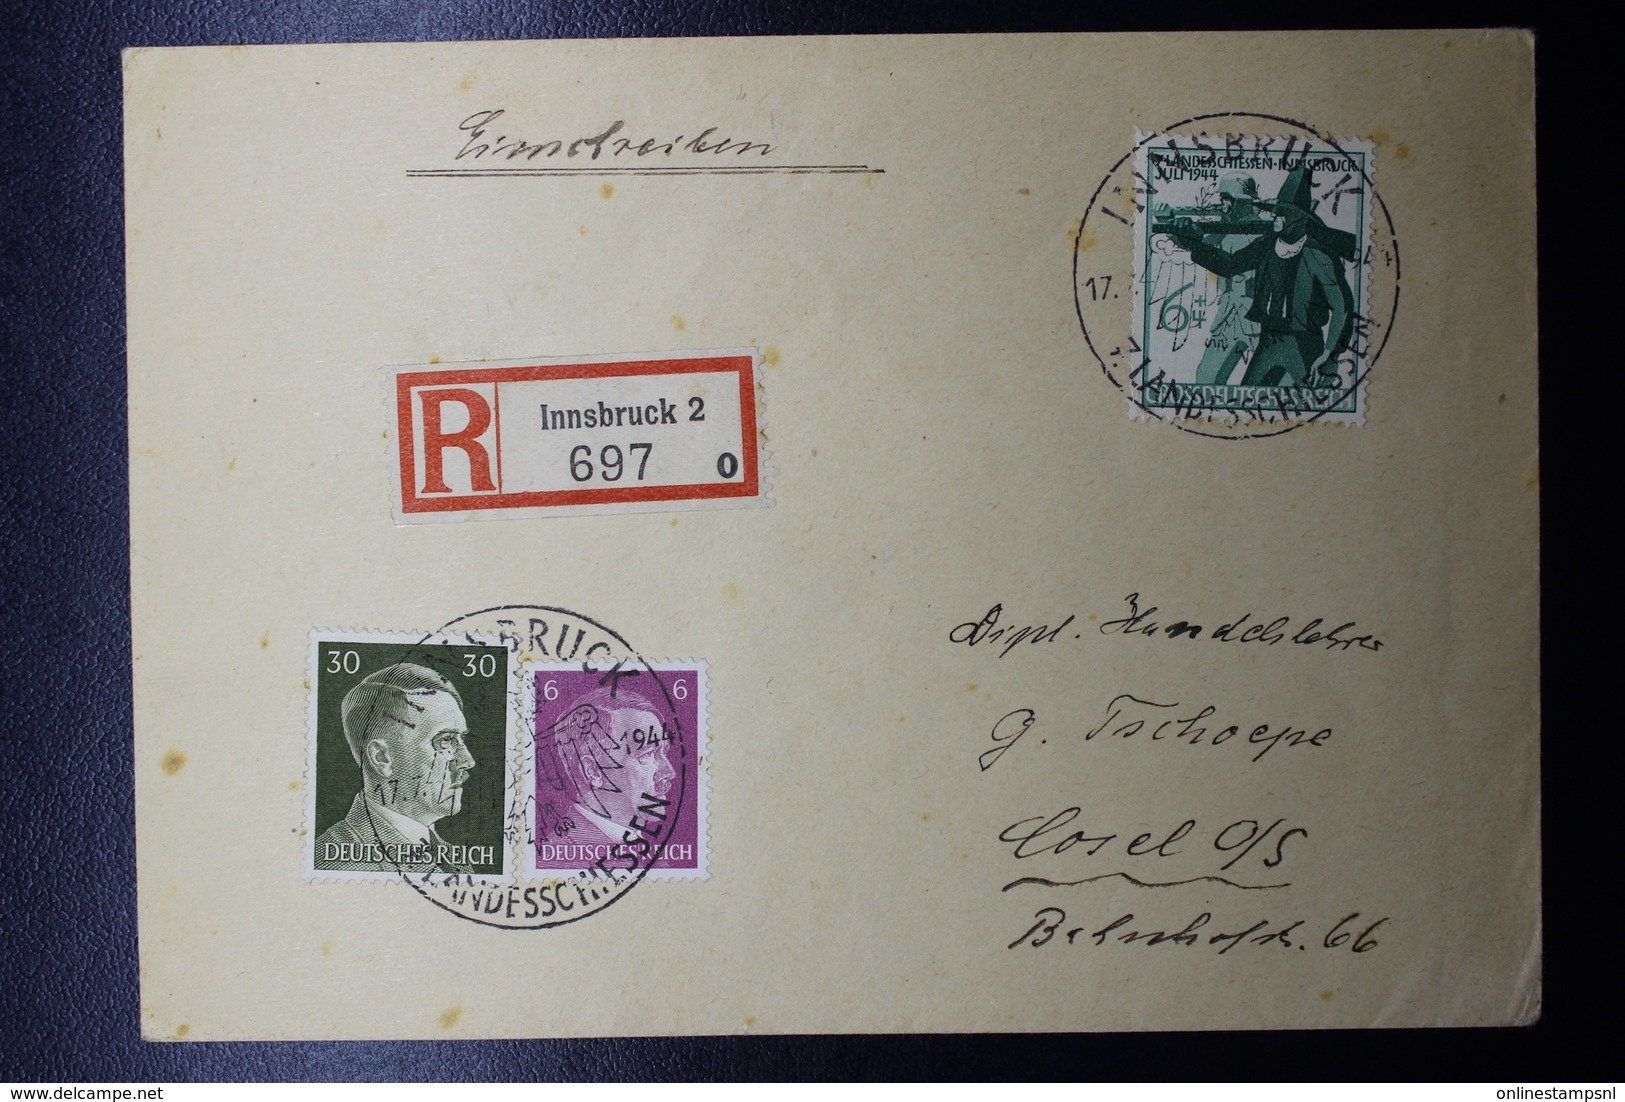 Austria Anschluss and Occupation related letters, cards, fragments and stamps, collection.